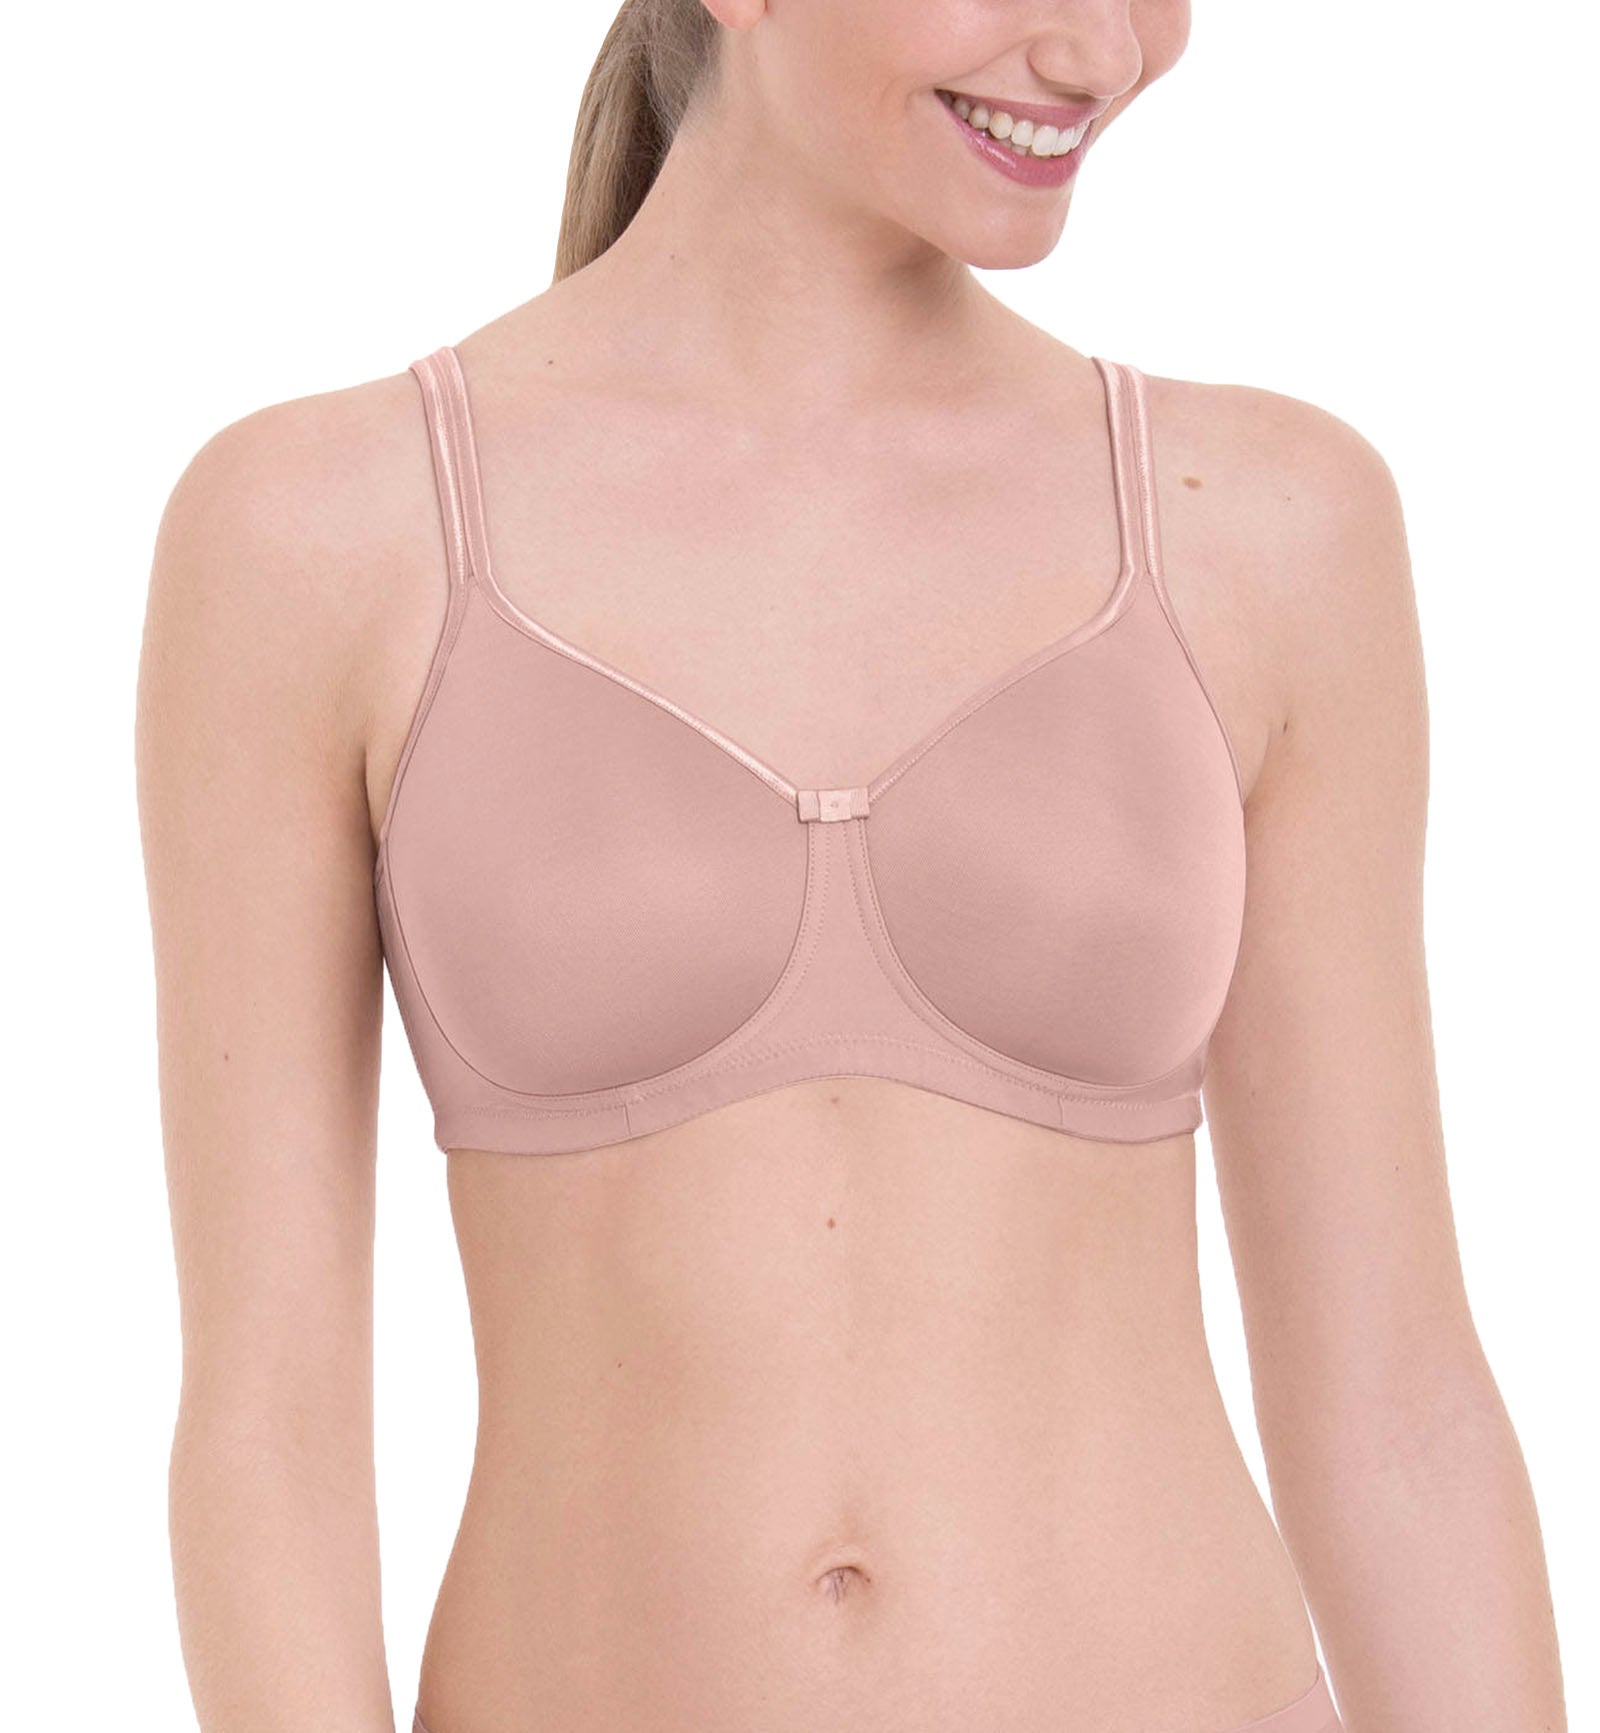 Anita Care Tonya Post Mastectomy Molded Softcup Bra (5706X),32A,Rosewood - Rosewood,32A